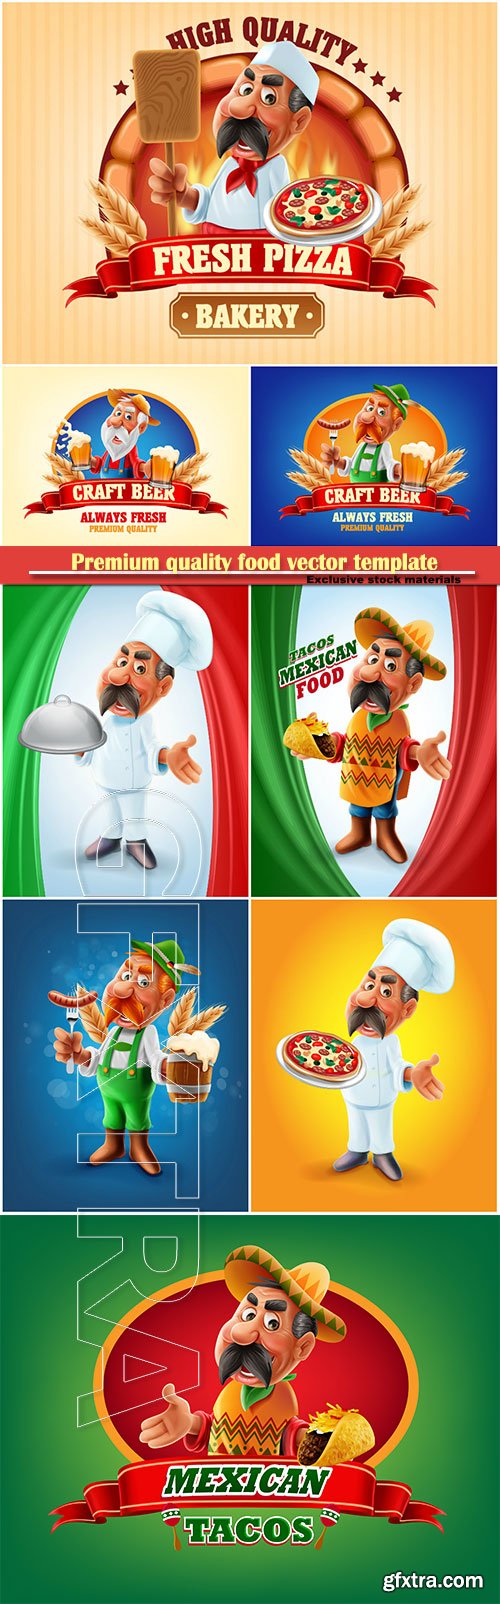 Premium quality food vector template, pizza, beer, Mexican food